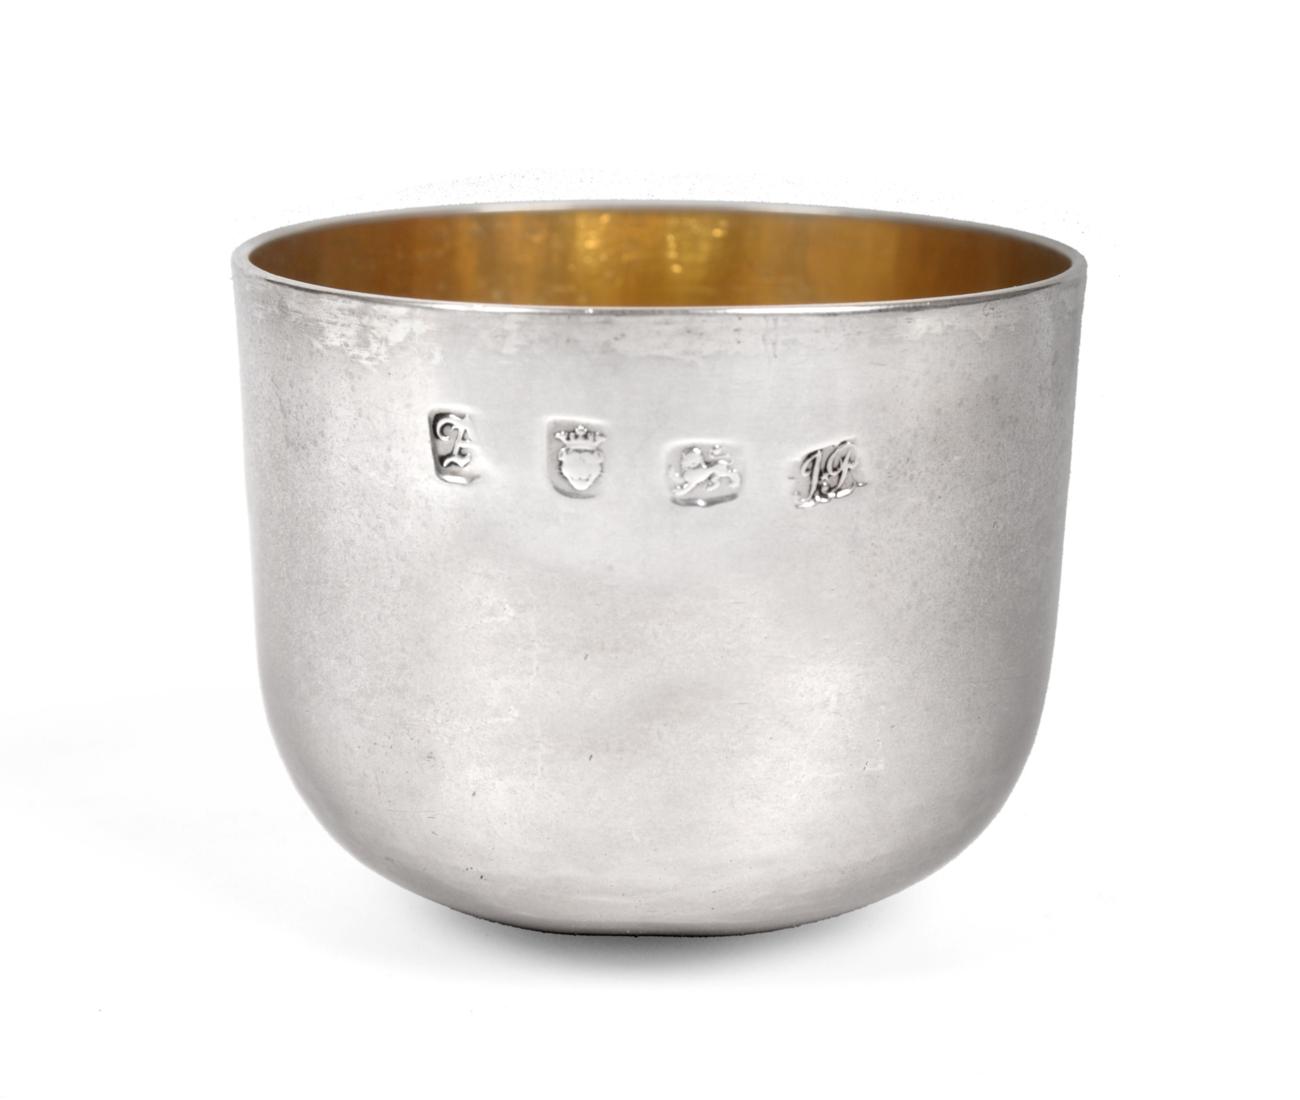 Lot 3003 - A George II Silver Tumbler-Cup, by John Payne, London, 1756, of typical form, with a slightly domed